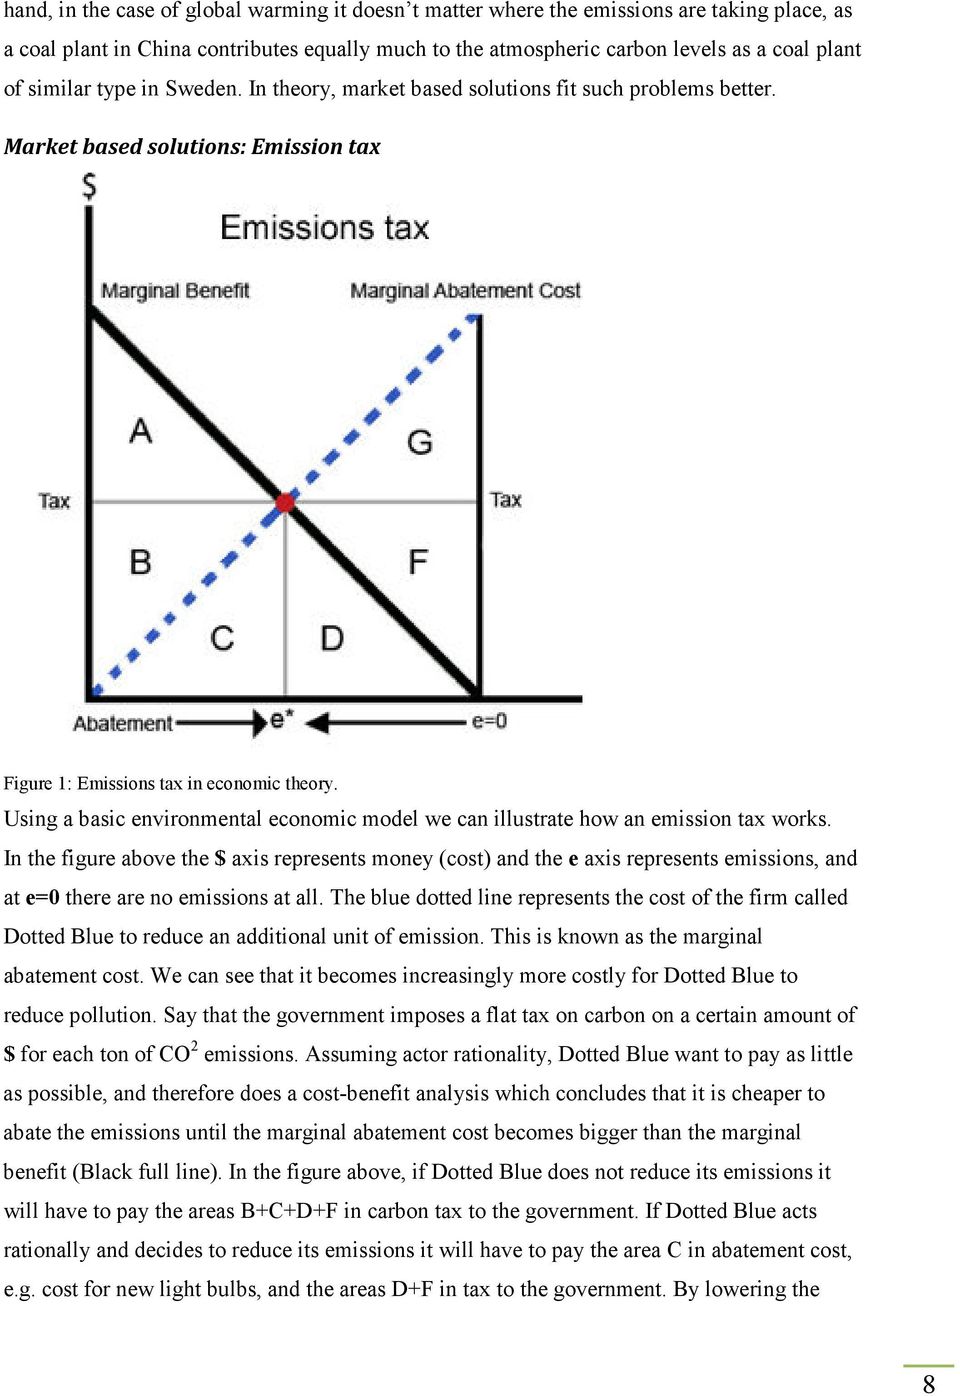 Using a basic environmental economic model we can illustrate how an emission tax works.